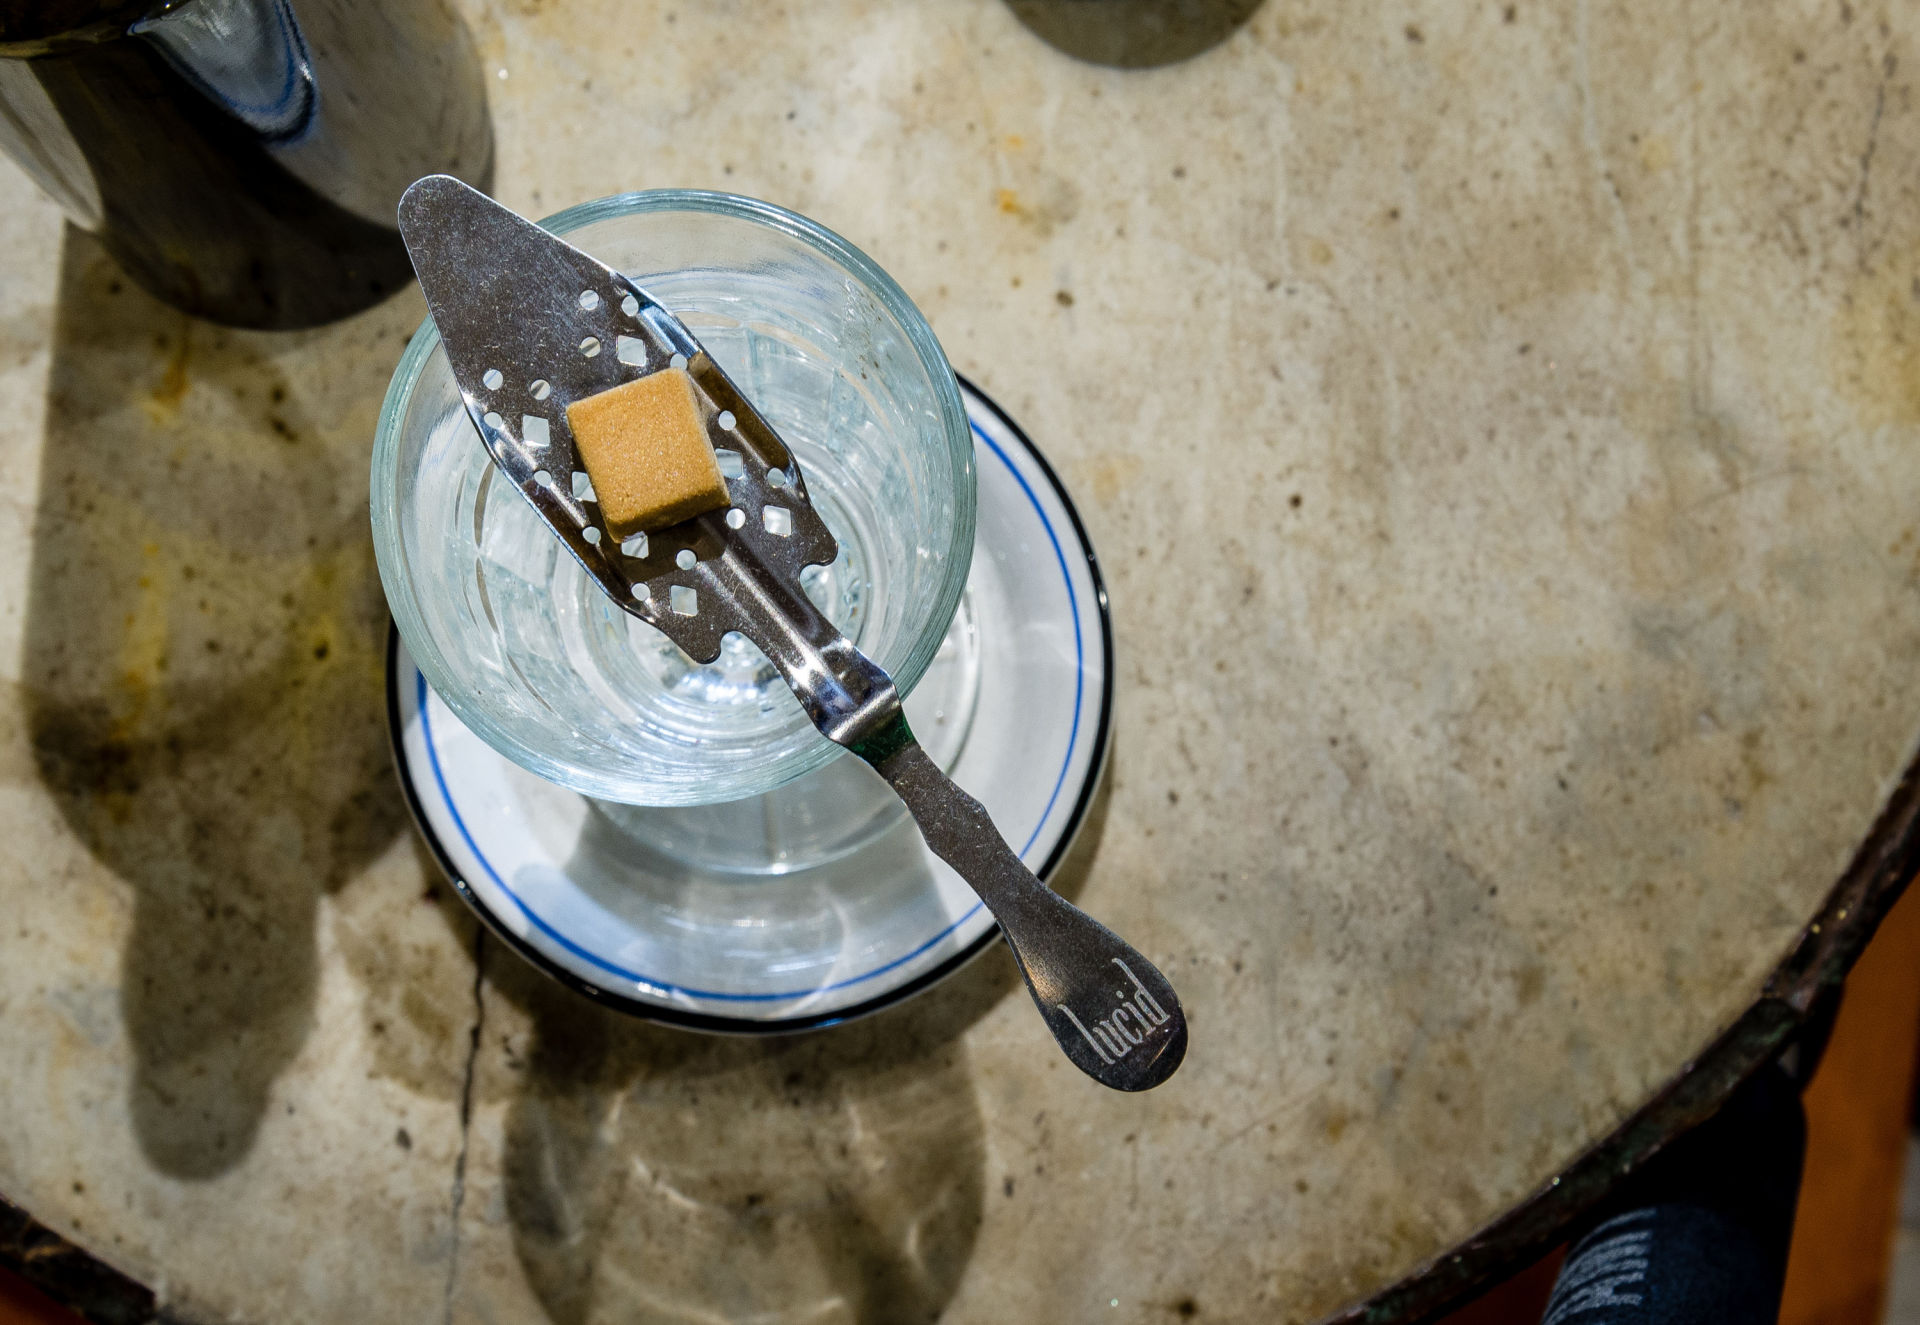 A sugar cube is cradled by a slotted spoon balanced on top of a glass of absinthe.